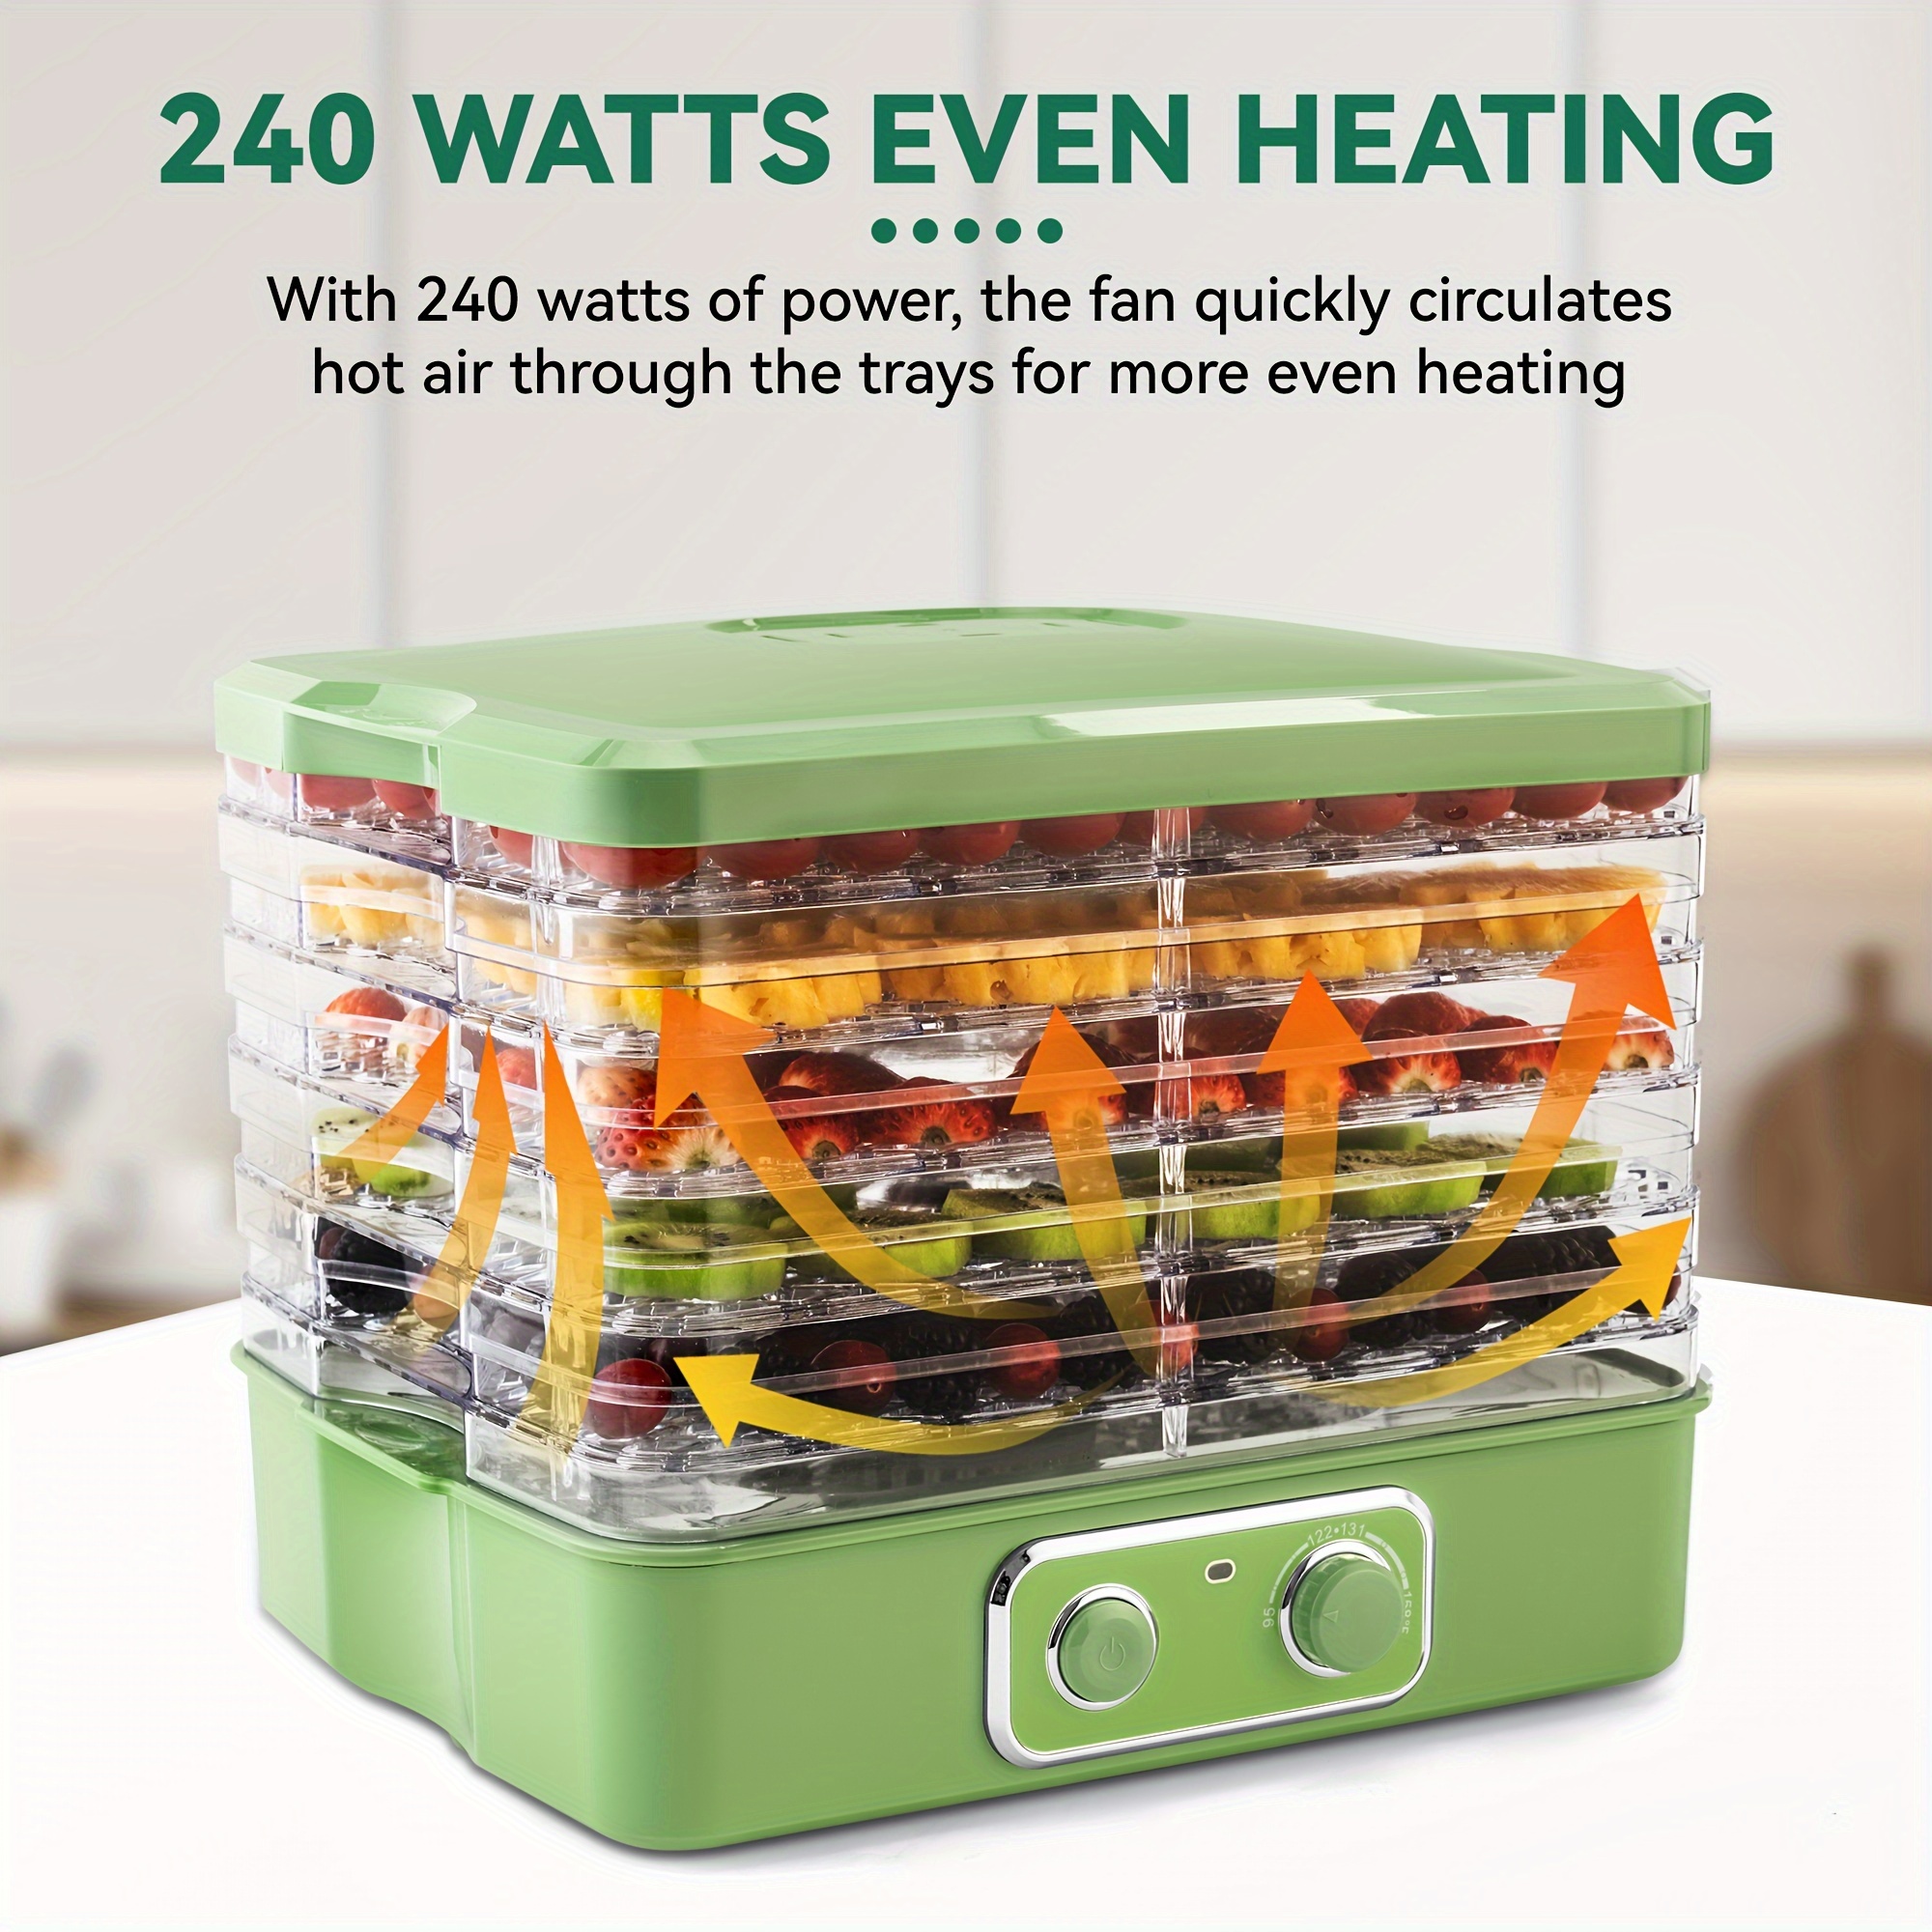 

Susteas Food For Jerky, 5 Bpa-free Stakable Tray Dehydrator Machine, Adjustable Temperature Controls For Fruit, Meat, Veggies, Dried Snacks, Herbs, Green, 240w | (5 Tier)